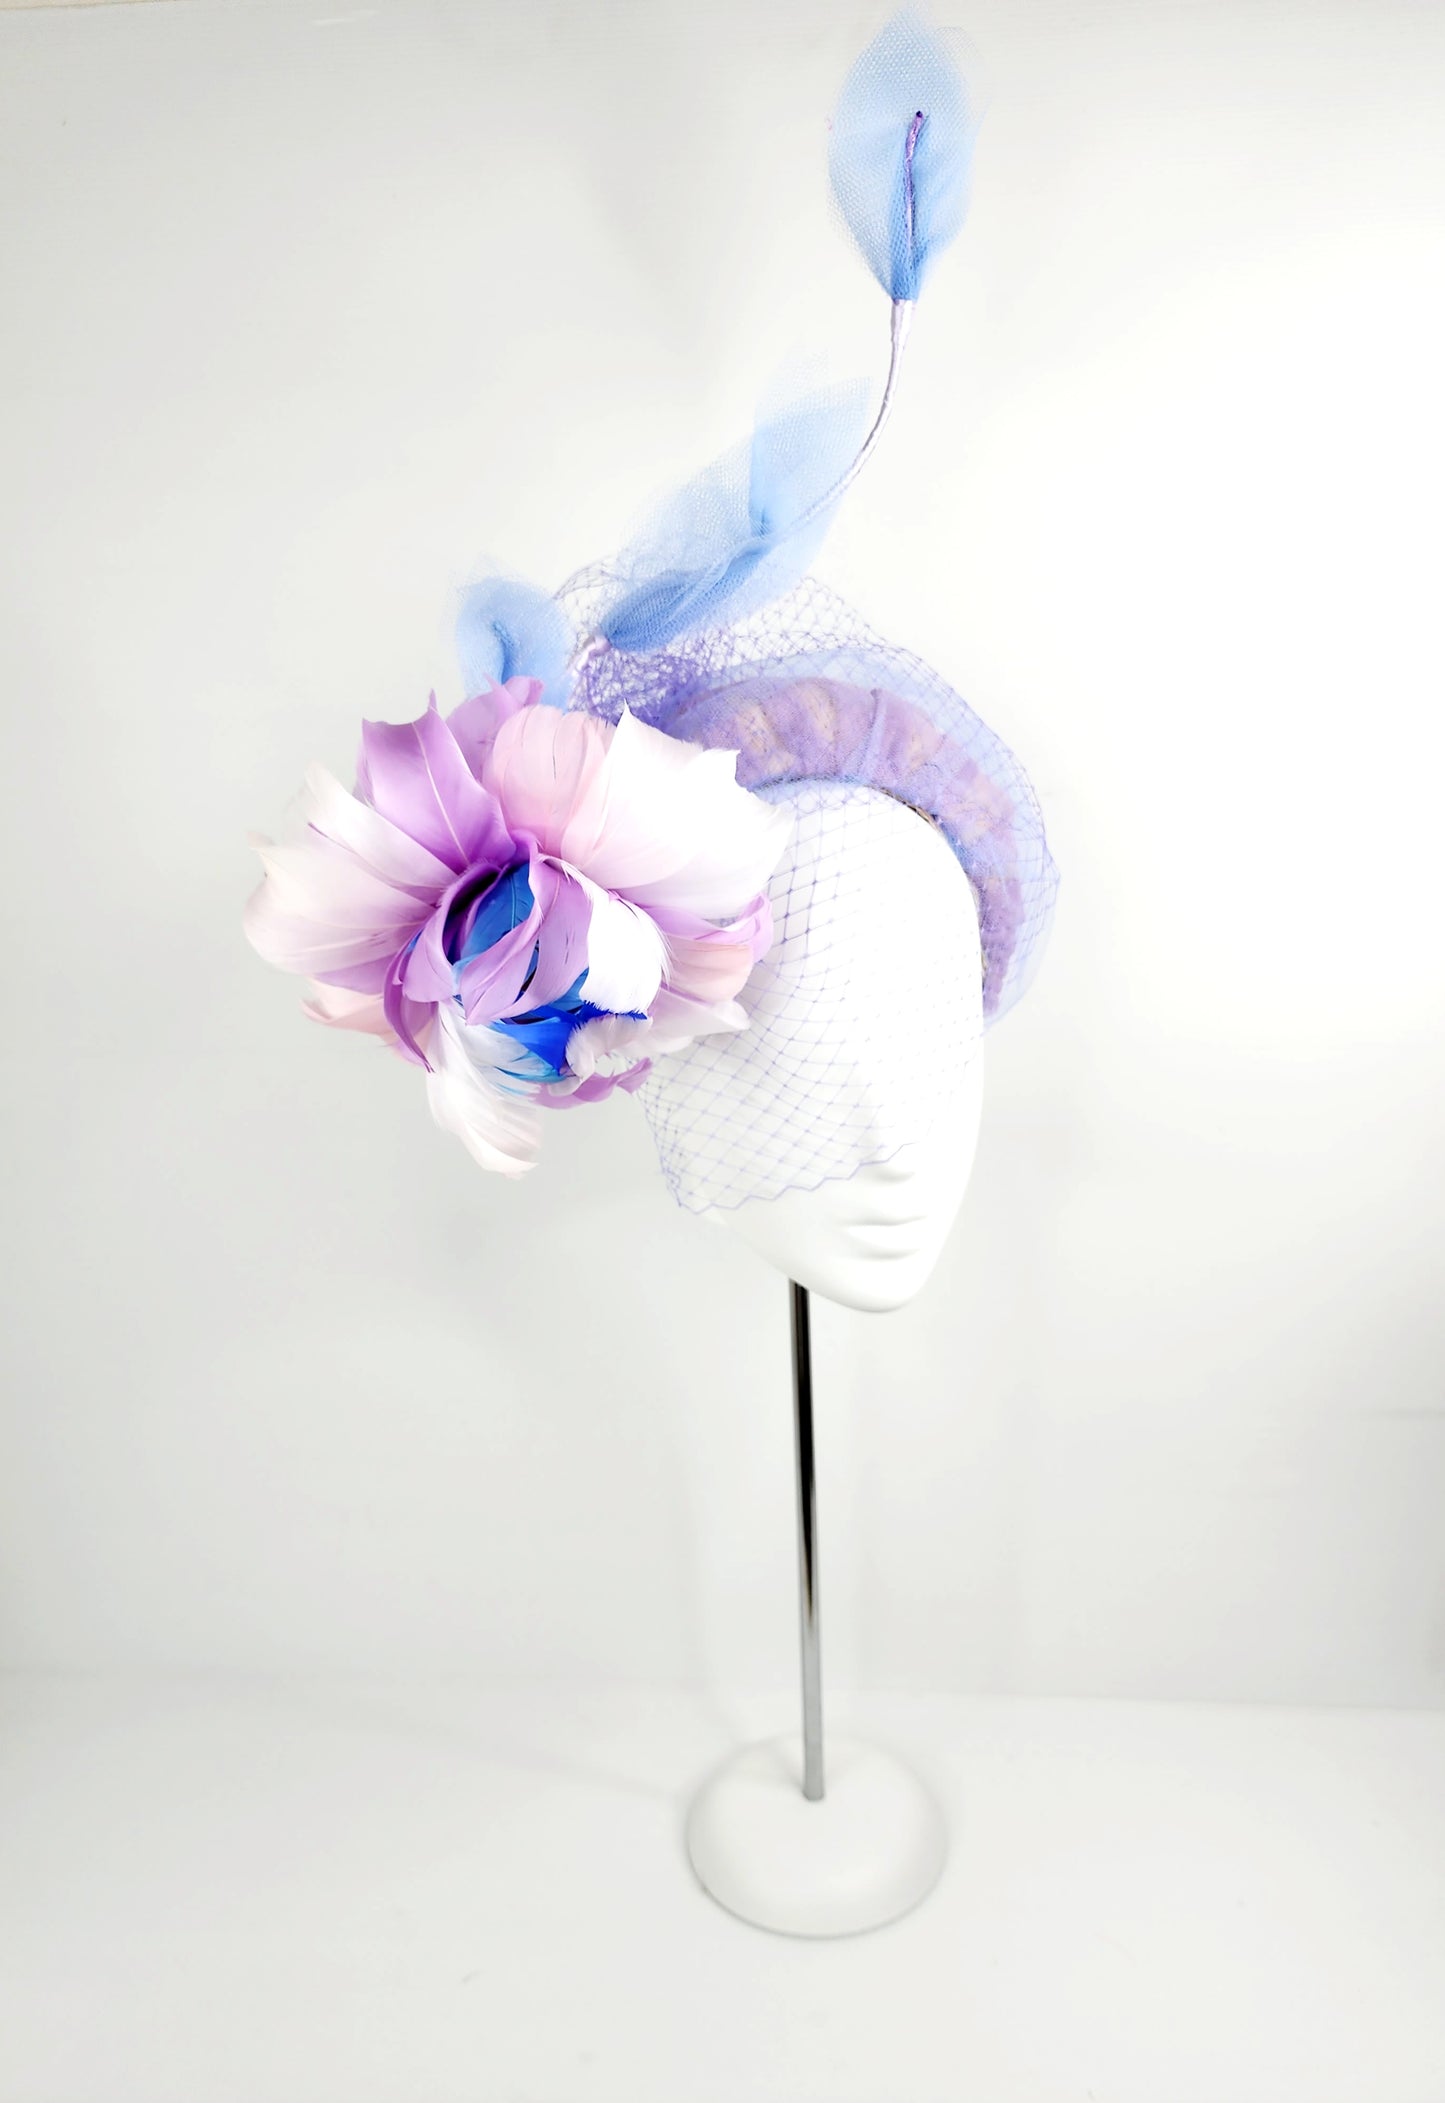 New millinery, a stunner